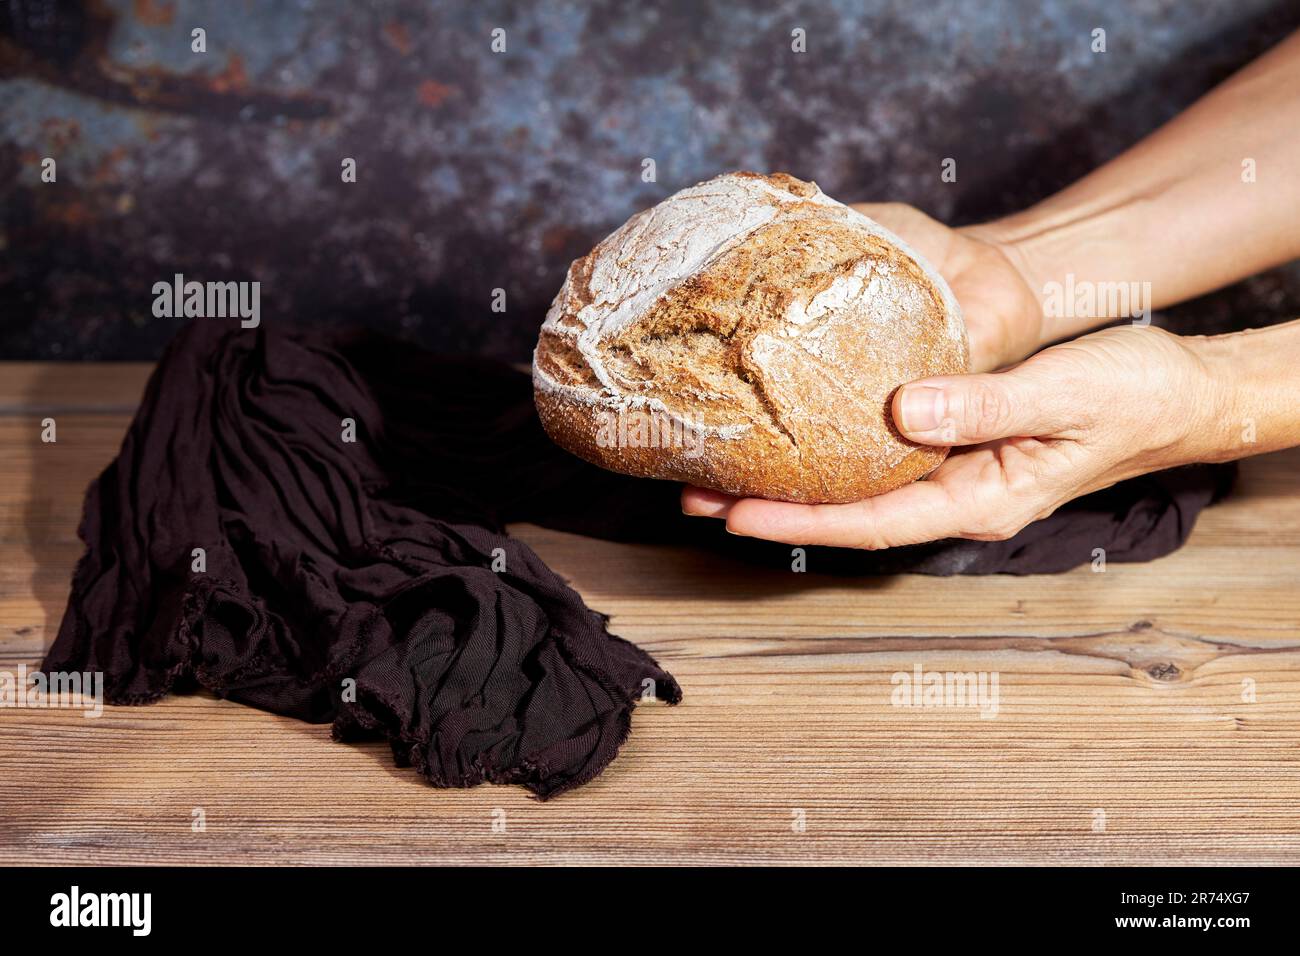 Hands of woman holding a golden loaf of bread. Food concept Stock Photo